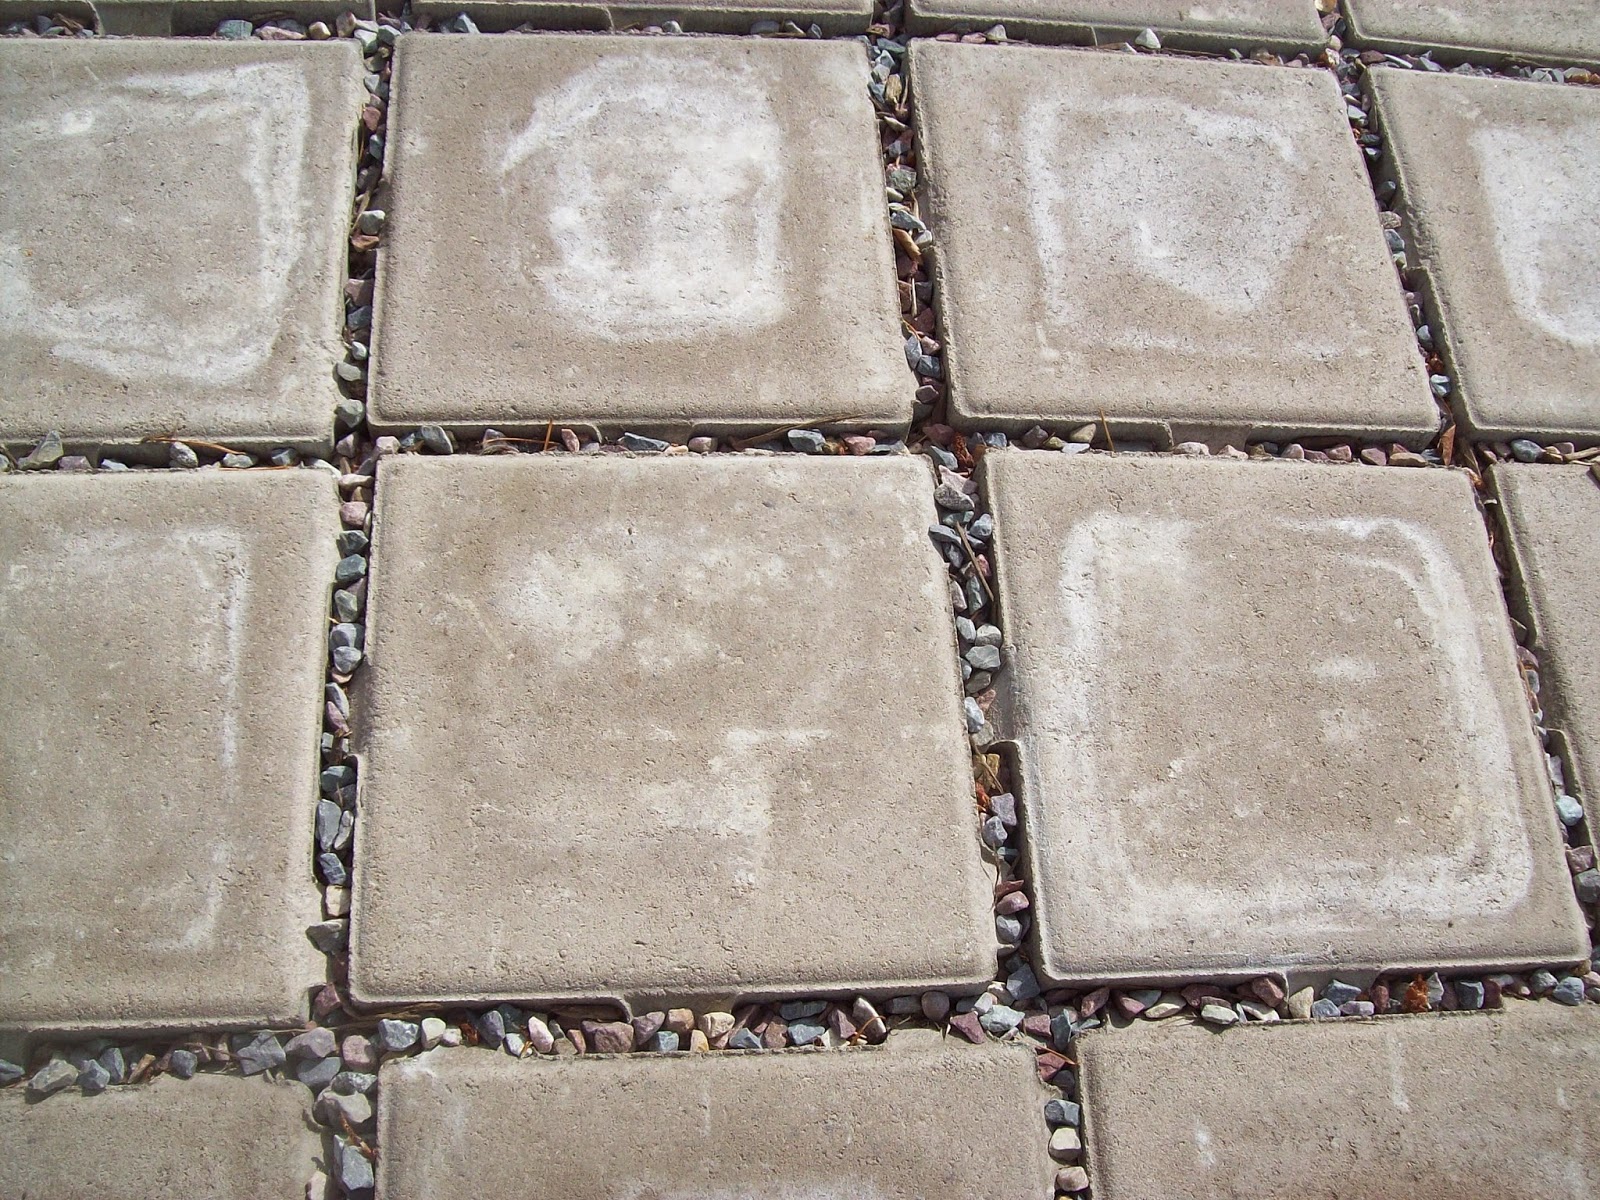 permeable patio tiles, a grayish tile, with small rocks in the cracks between tiles.